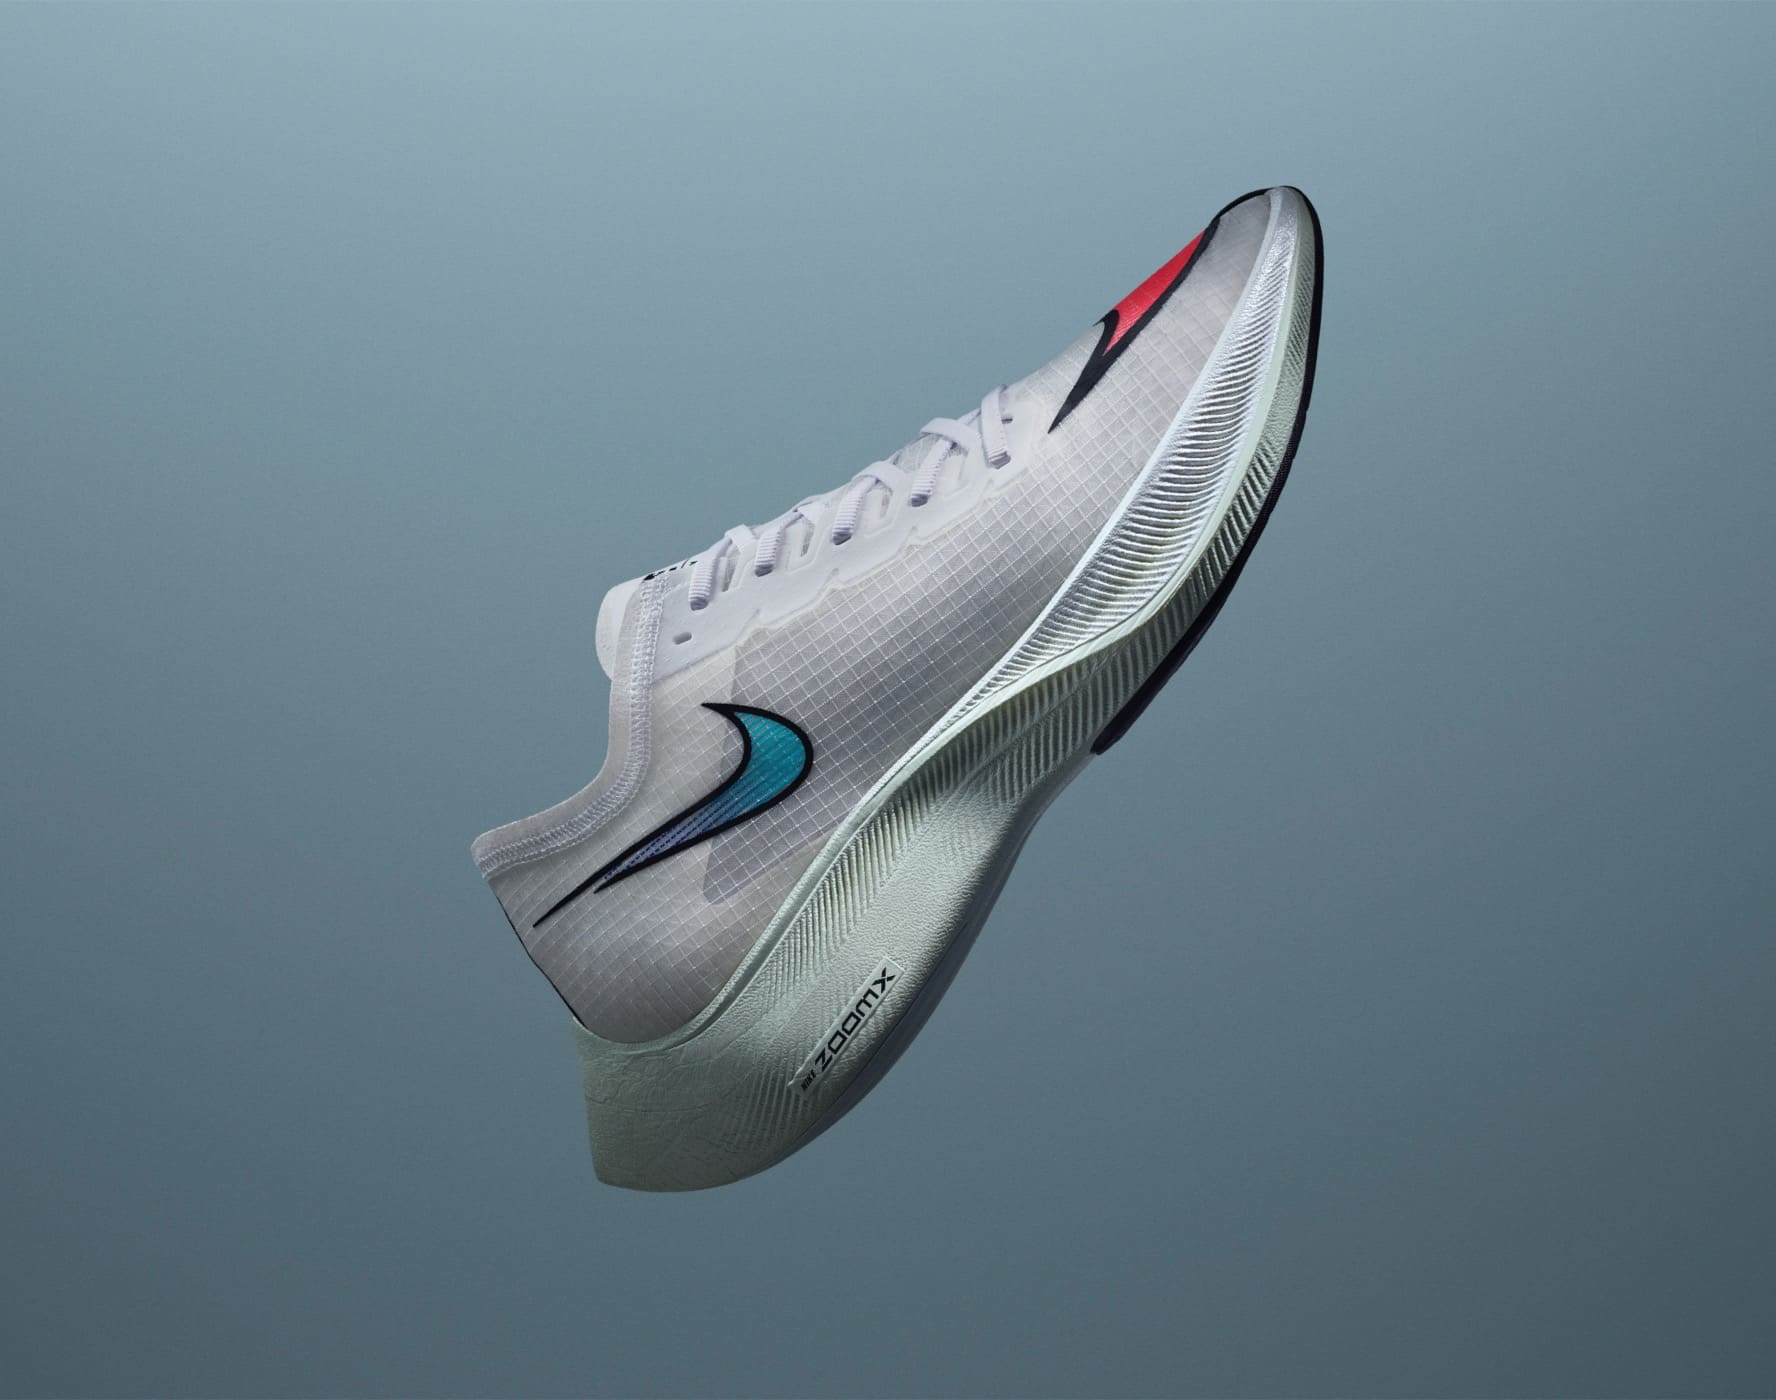 Nike Featuring the new Vaporfly NEXT%.